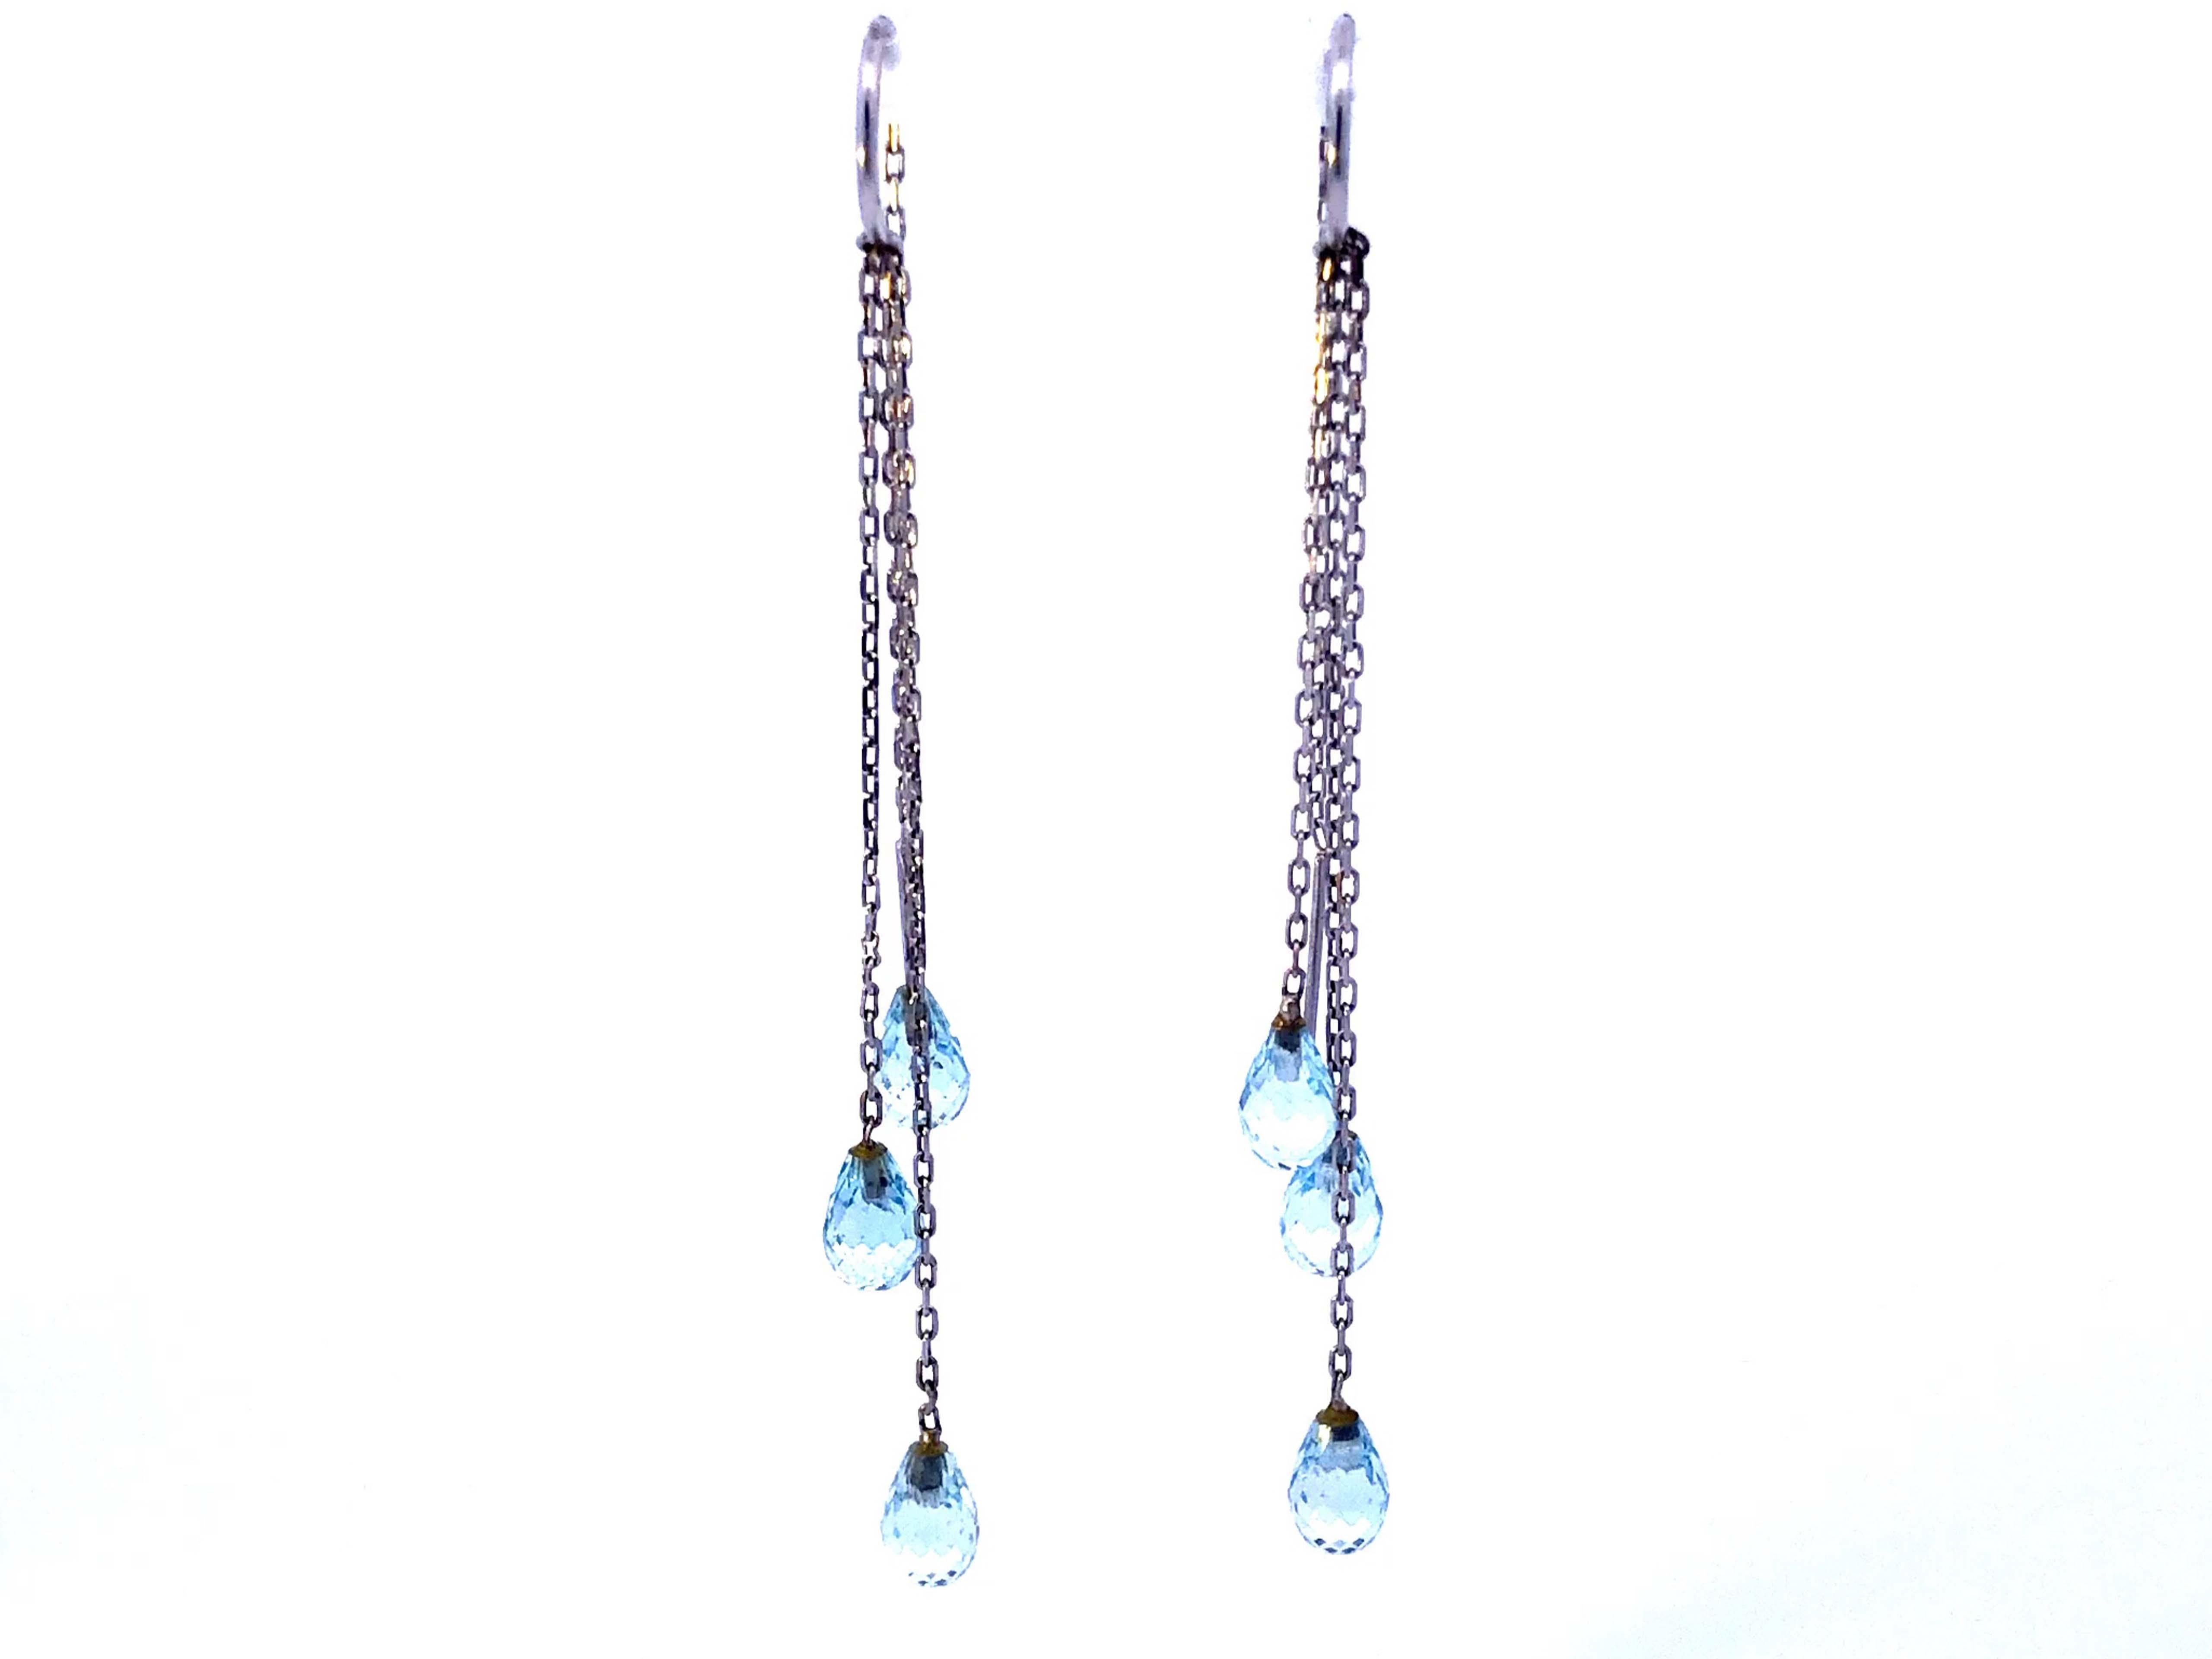 Briolette Cut Aquamarine Dangle Earrings in 14k White Gold In Excellent Condition For Sale In Honolulu, HI